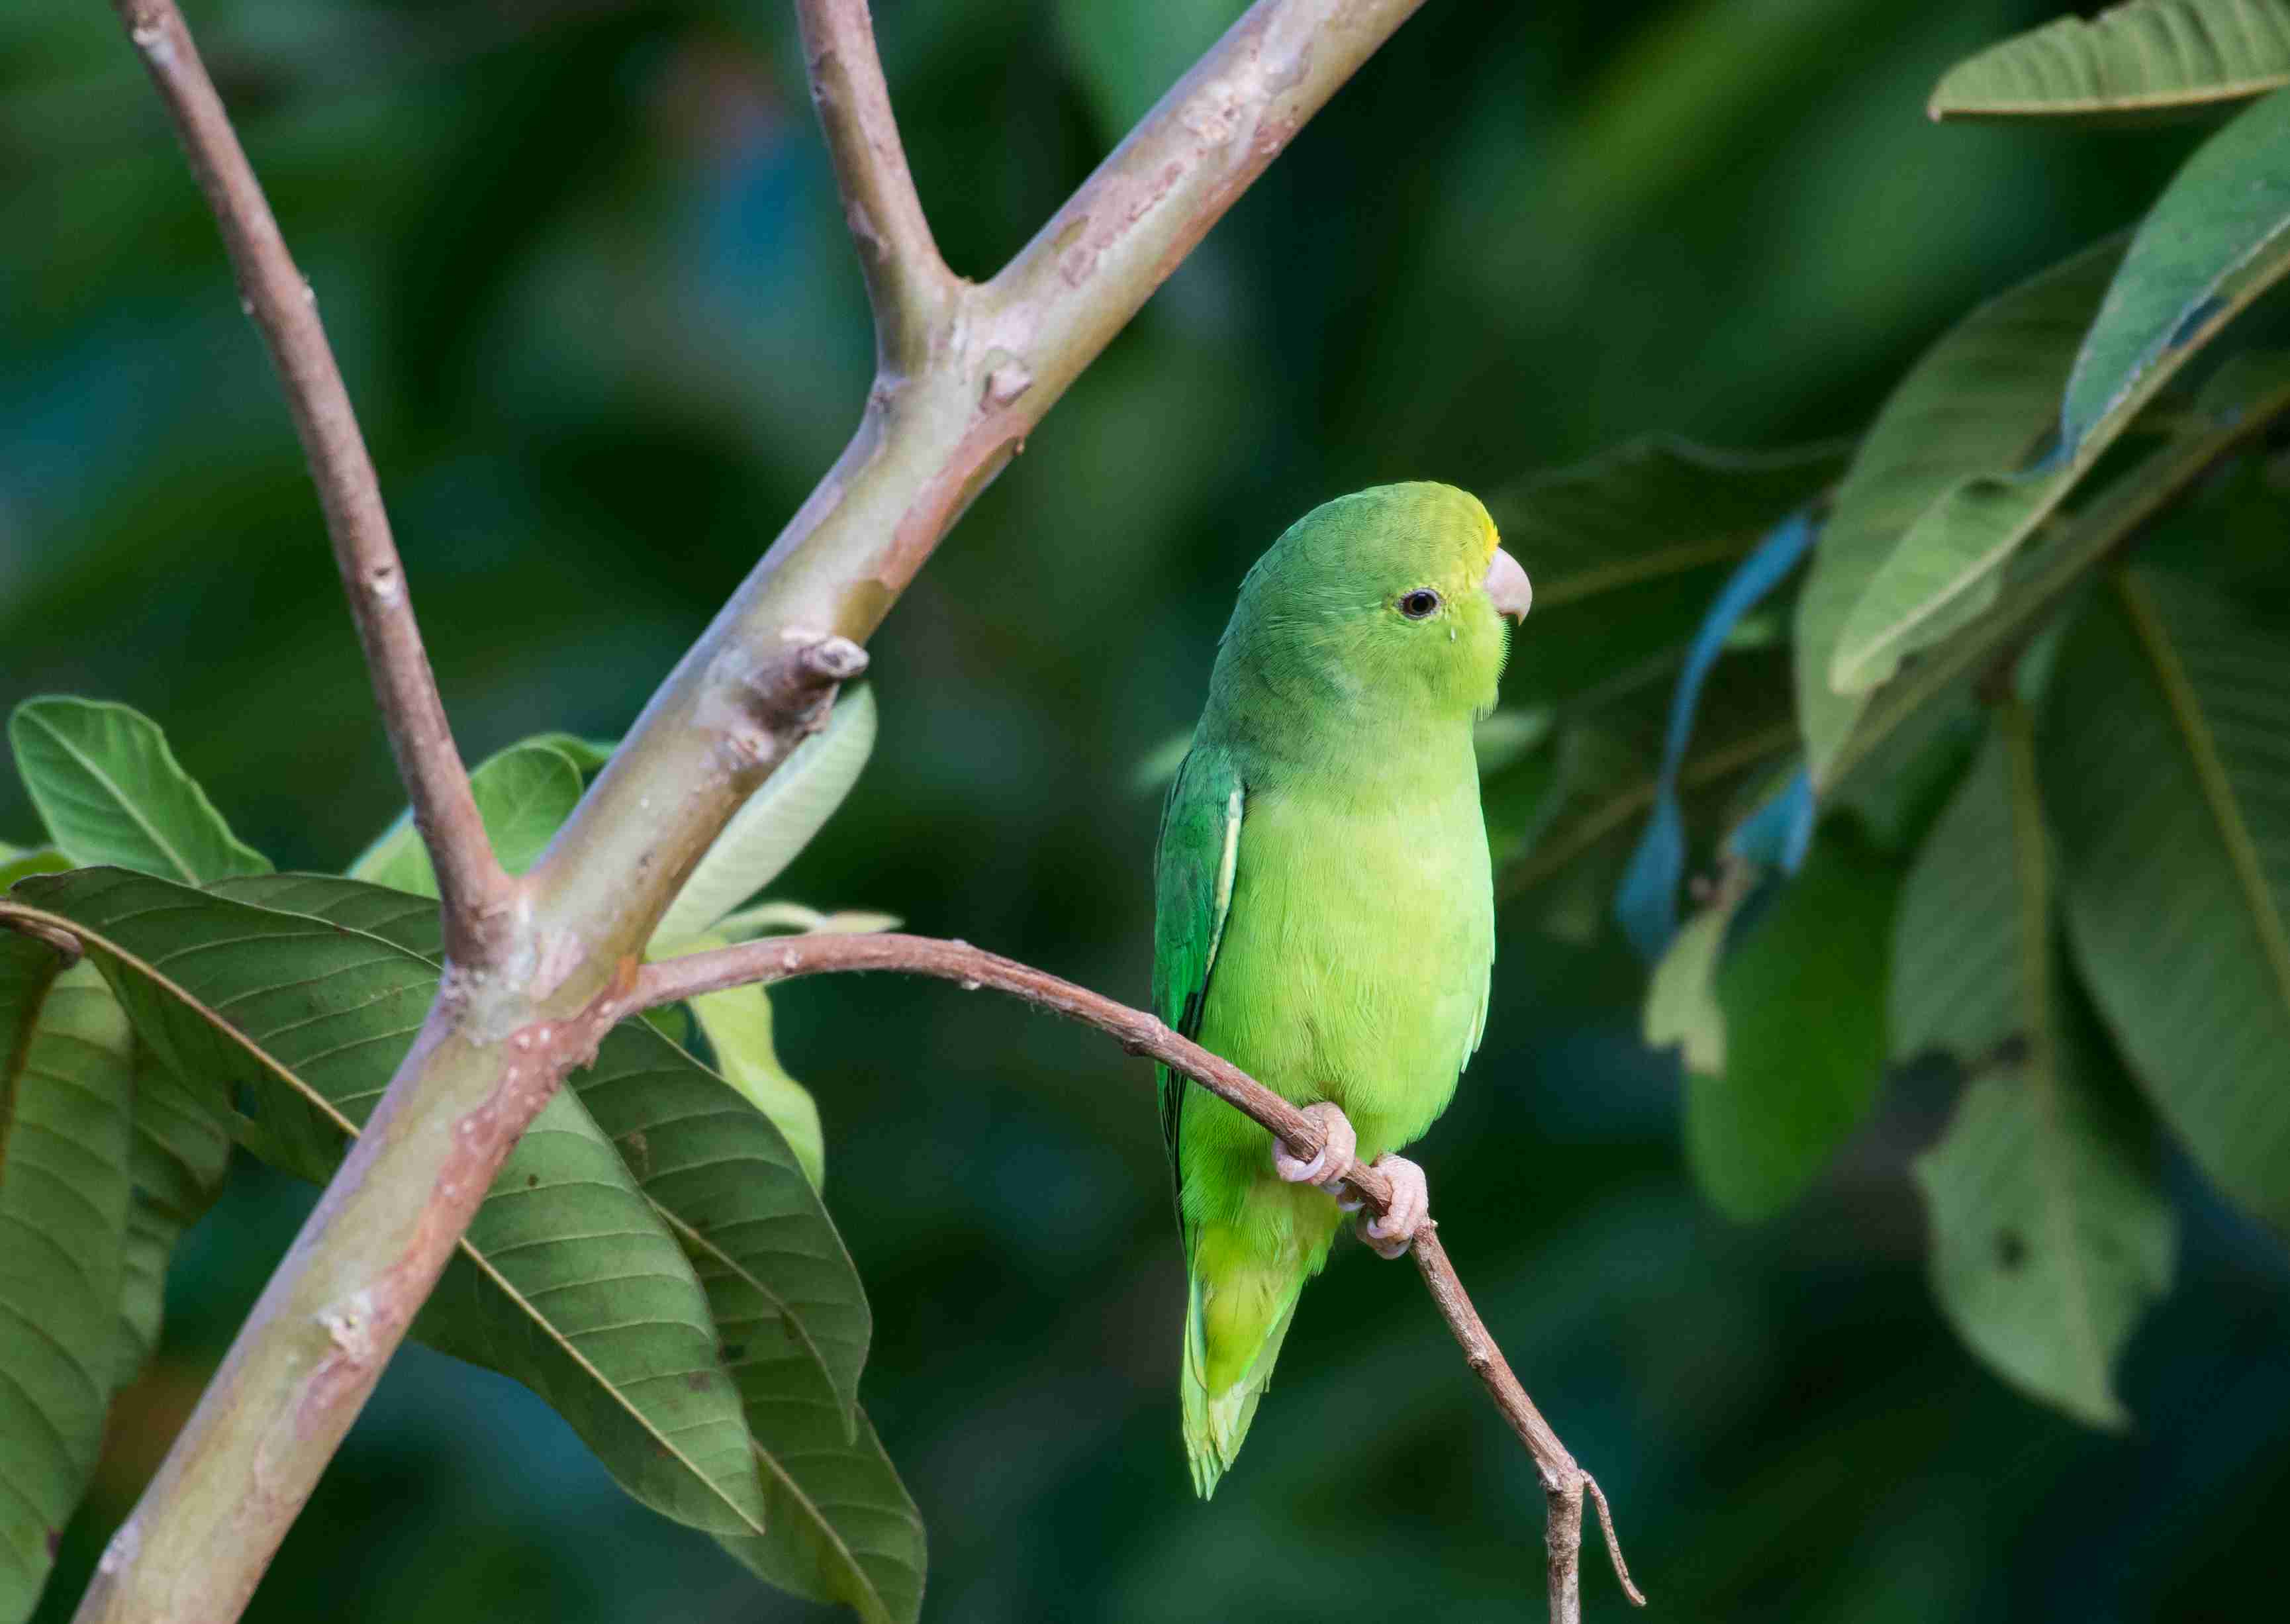 Parrotlet on a branch